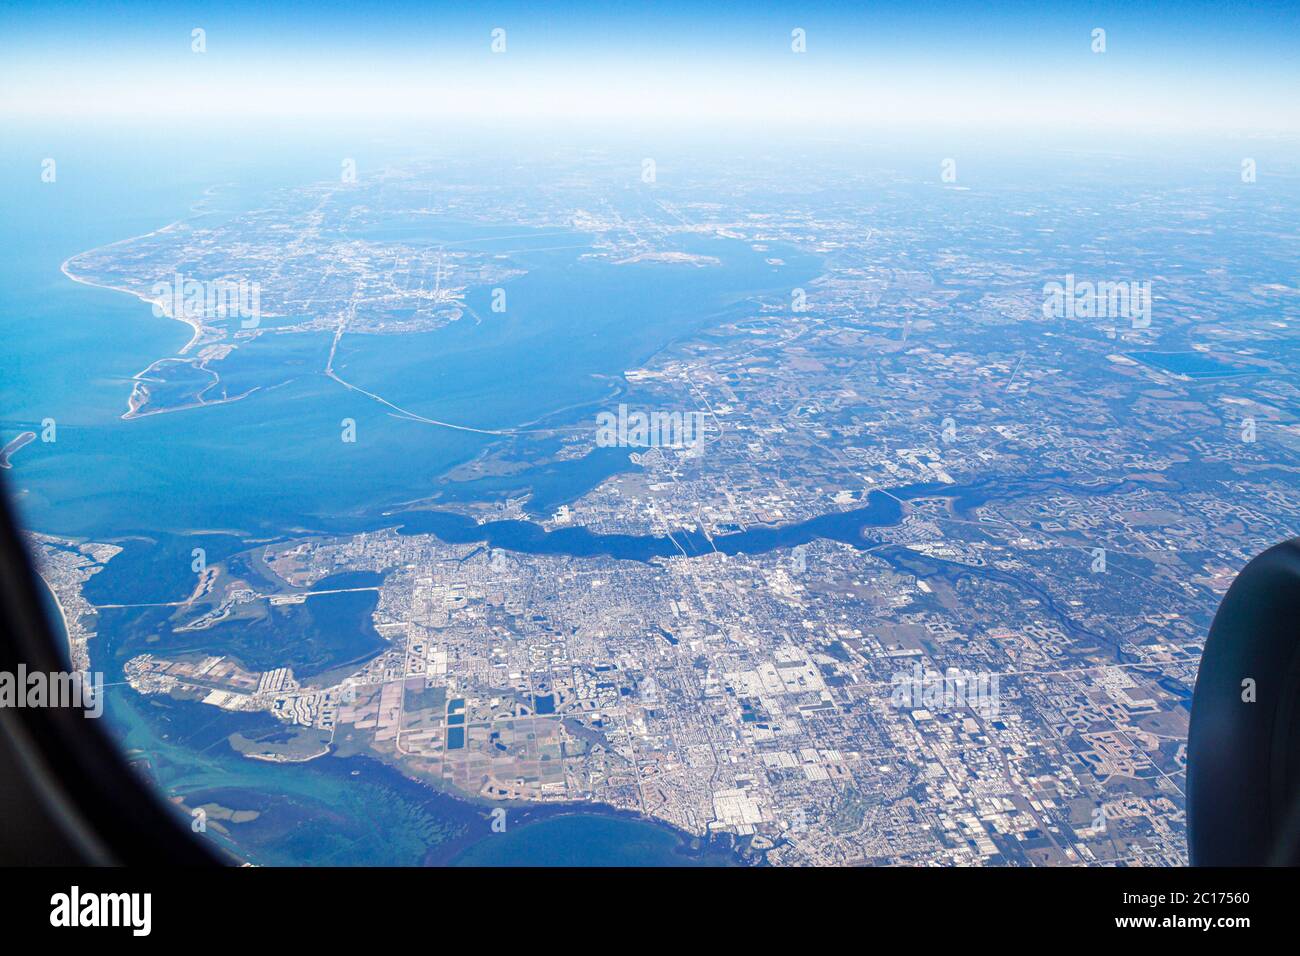 Florida,Tampa Bay,Manatee River,Bradenton,Sunshine Skyway Bridge,Gulf of Mexico Coast,aerial overhead view from above,American Airlines Miami to New O Stock Photo